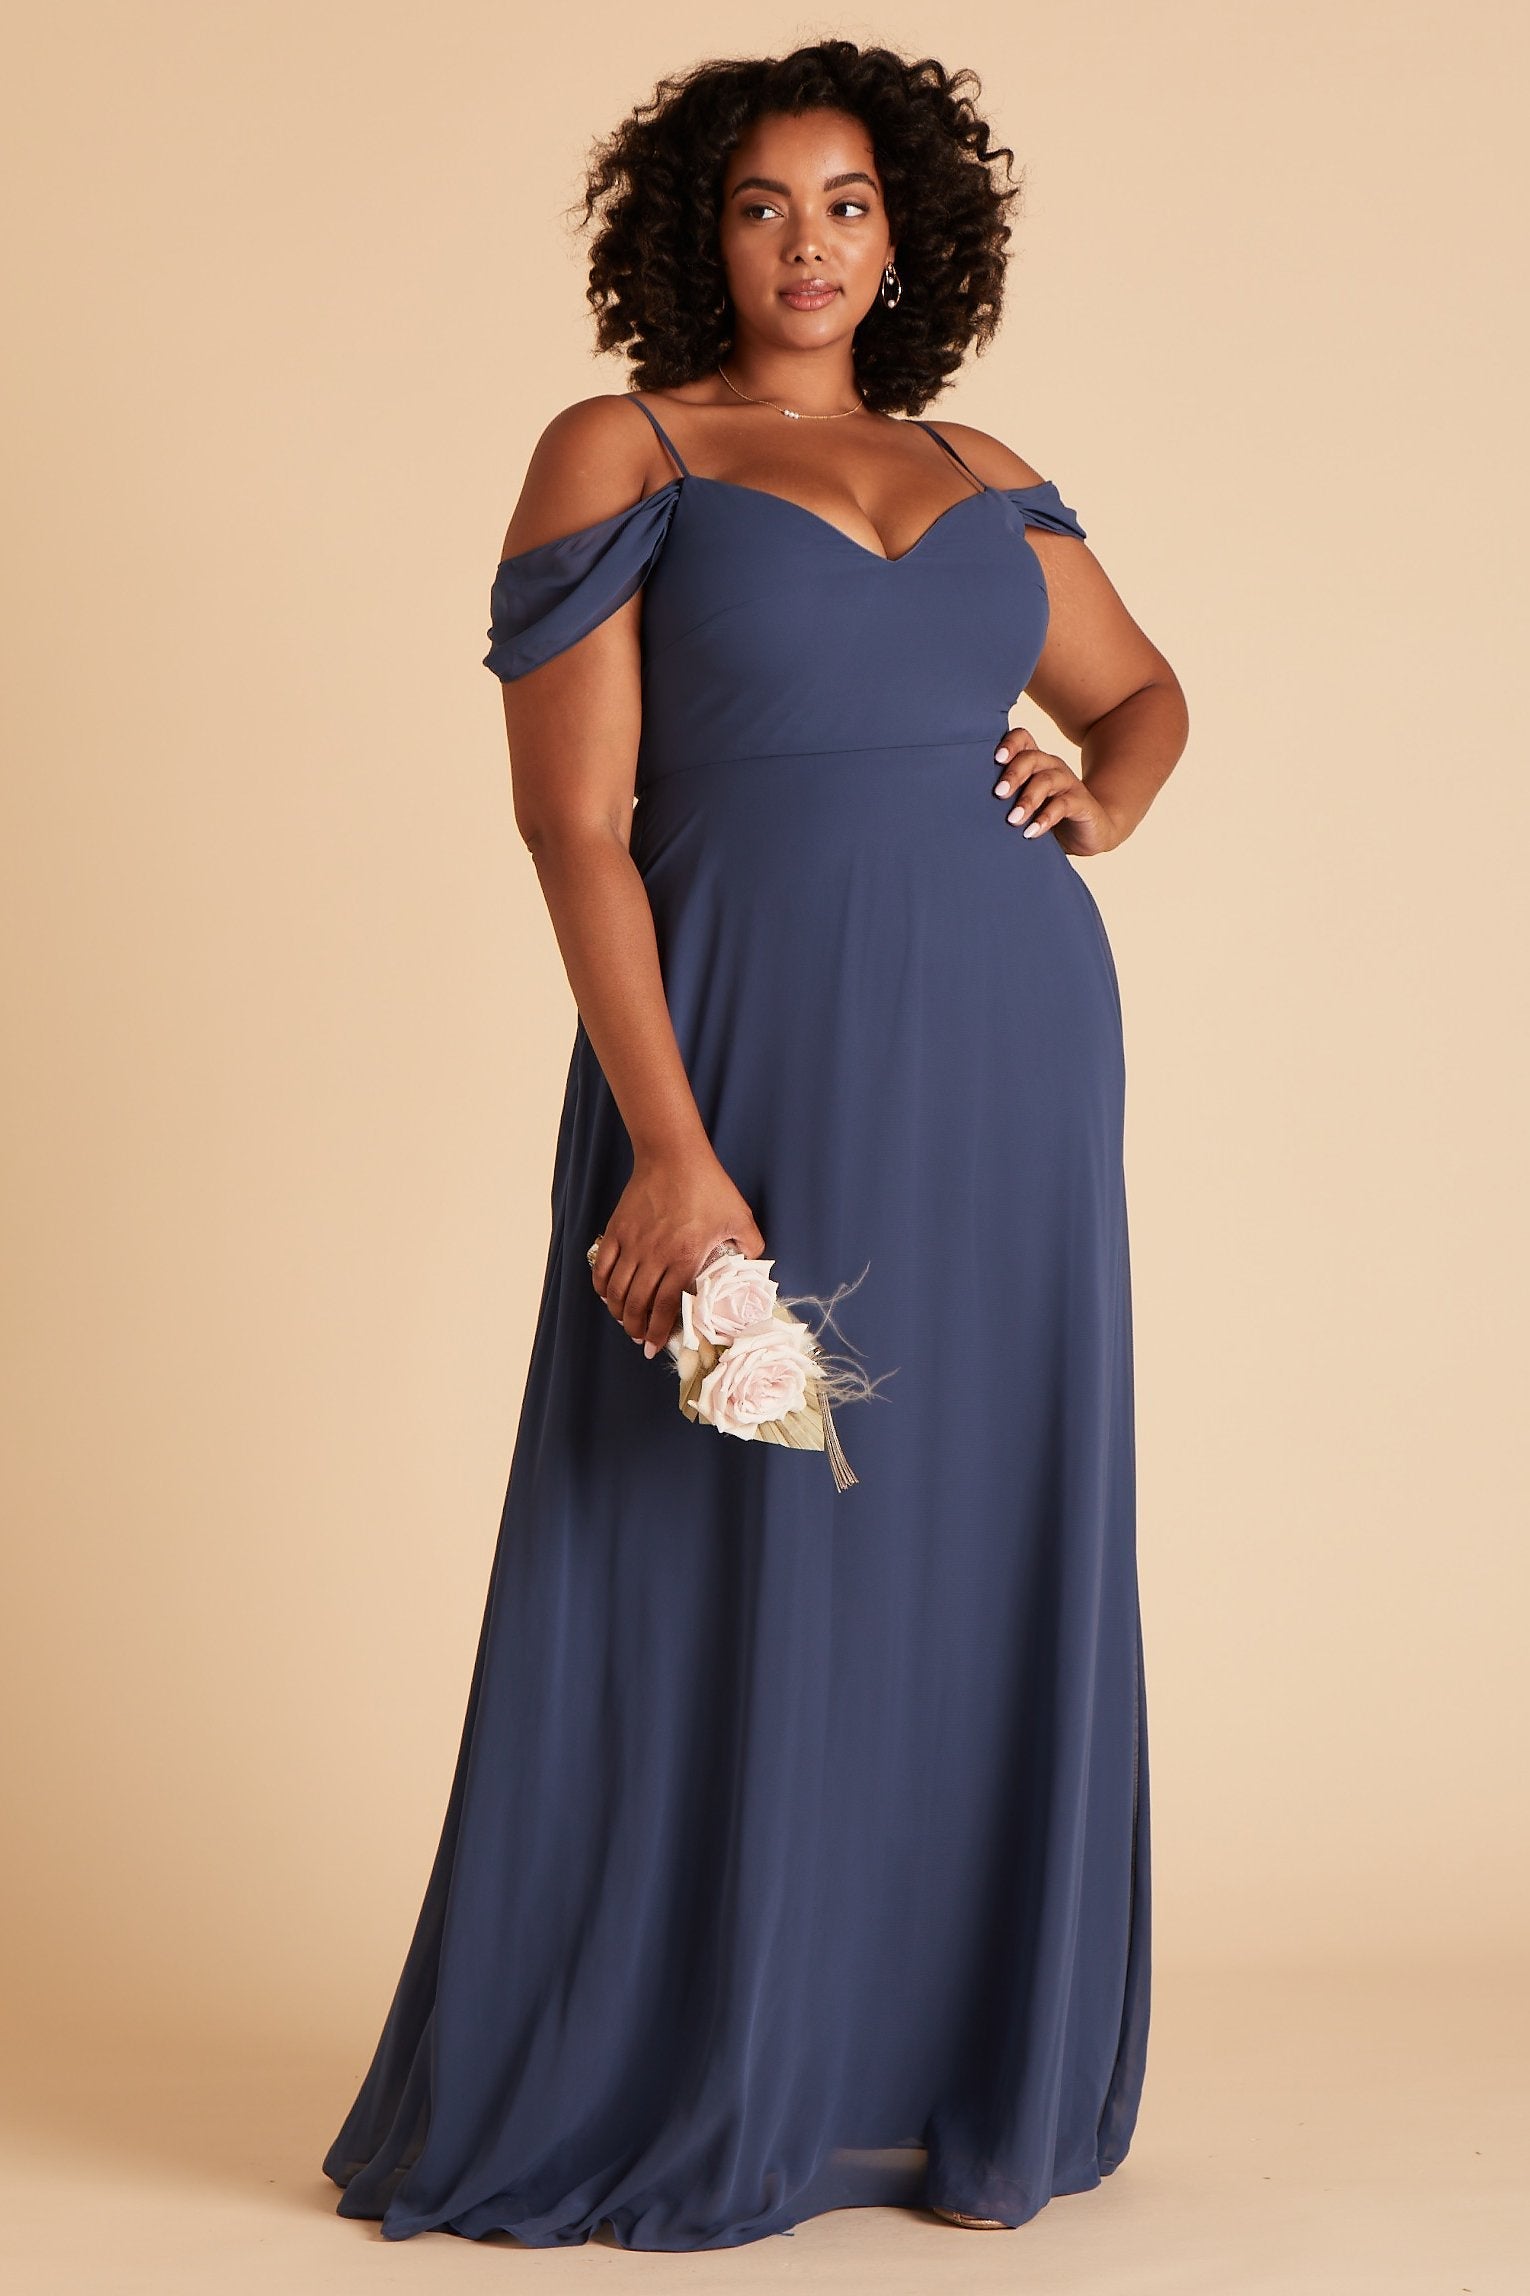 Devin convertible plus size bridesmaids dress in slate blue chiffon by Birdy Grey, front view